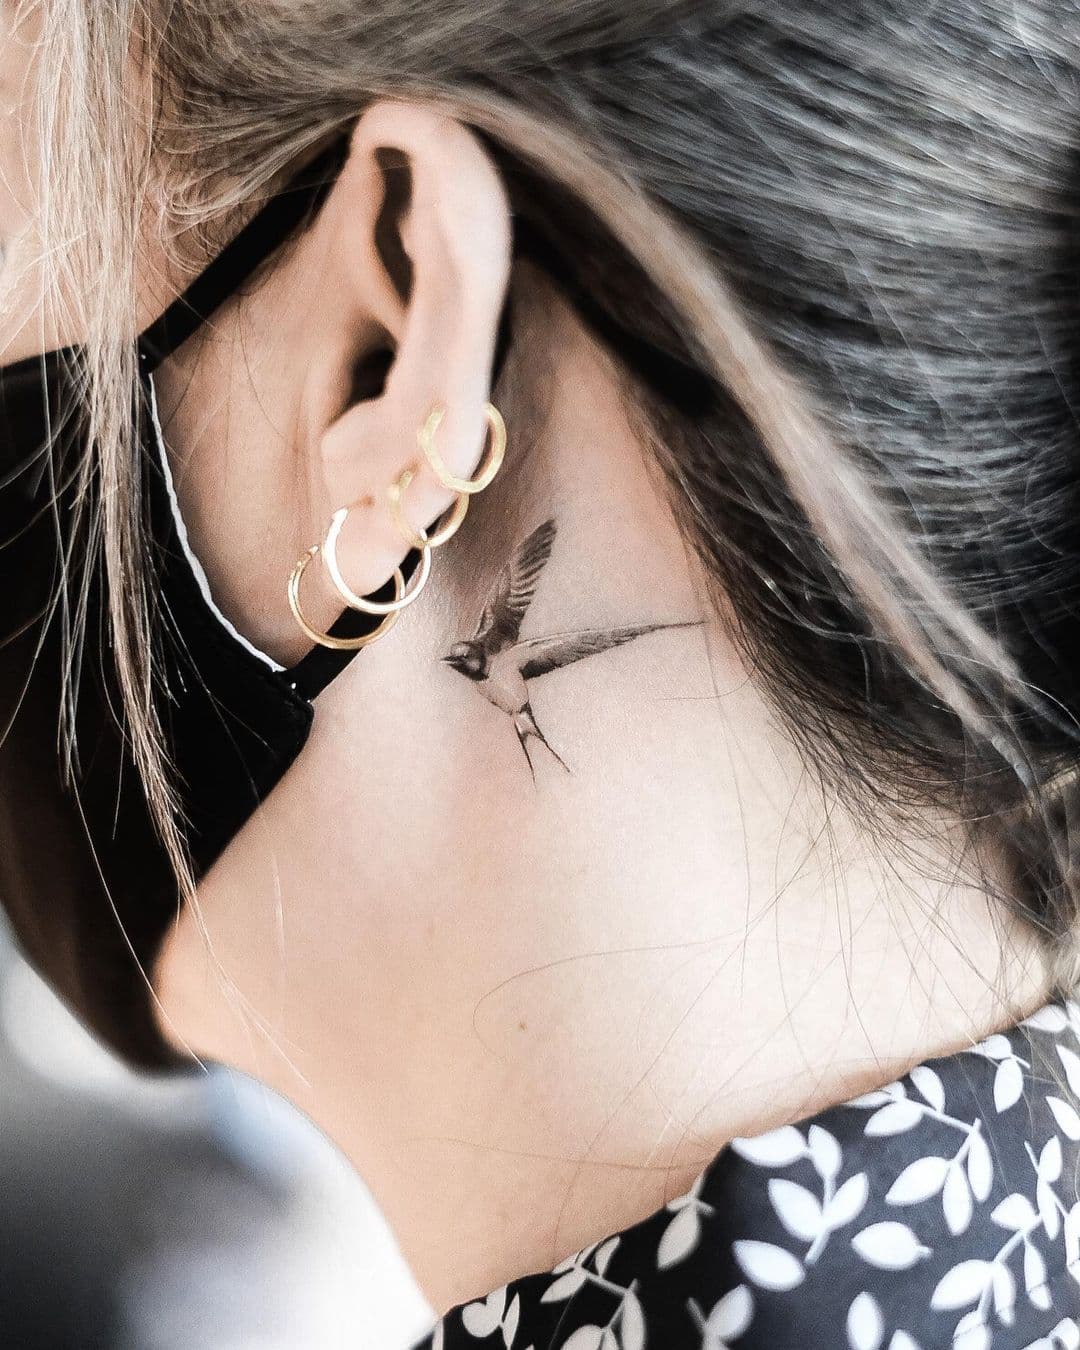 Swallow Tattoo Behind The Ear 2